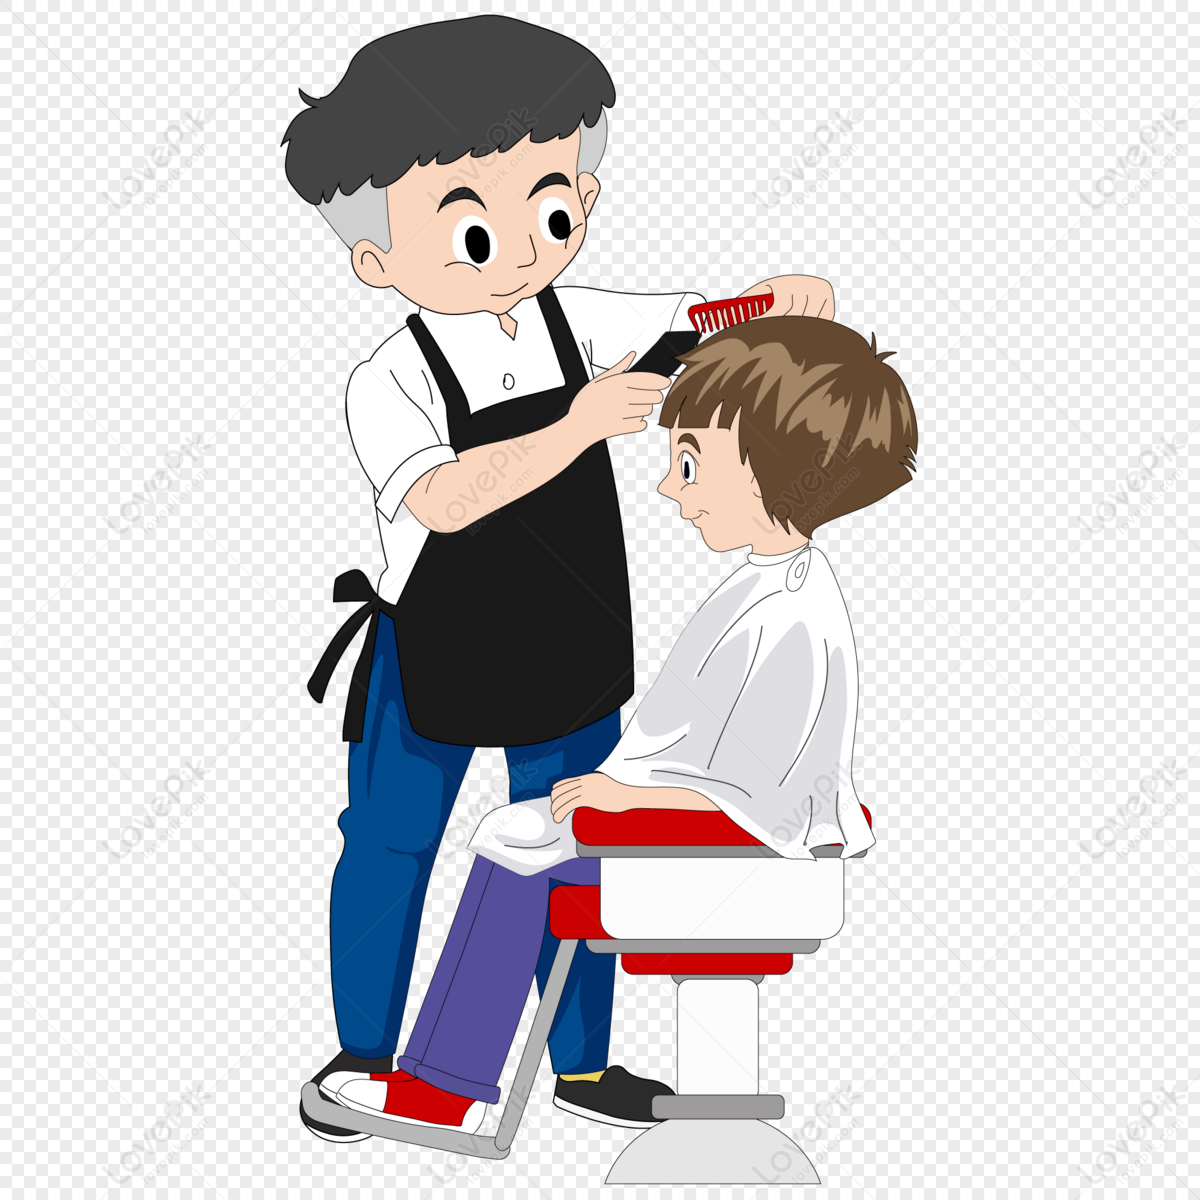 Boy Haircut PNG Image Free Download And Clipart Image For Free Download -  Lovepik | 401004091